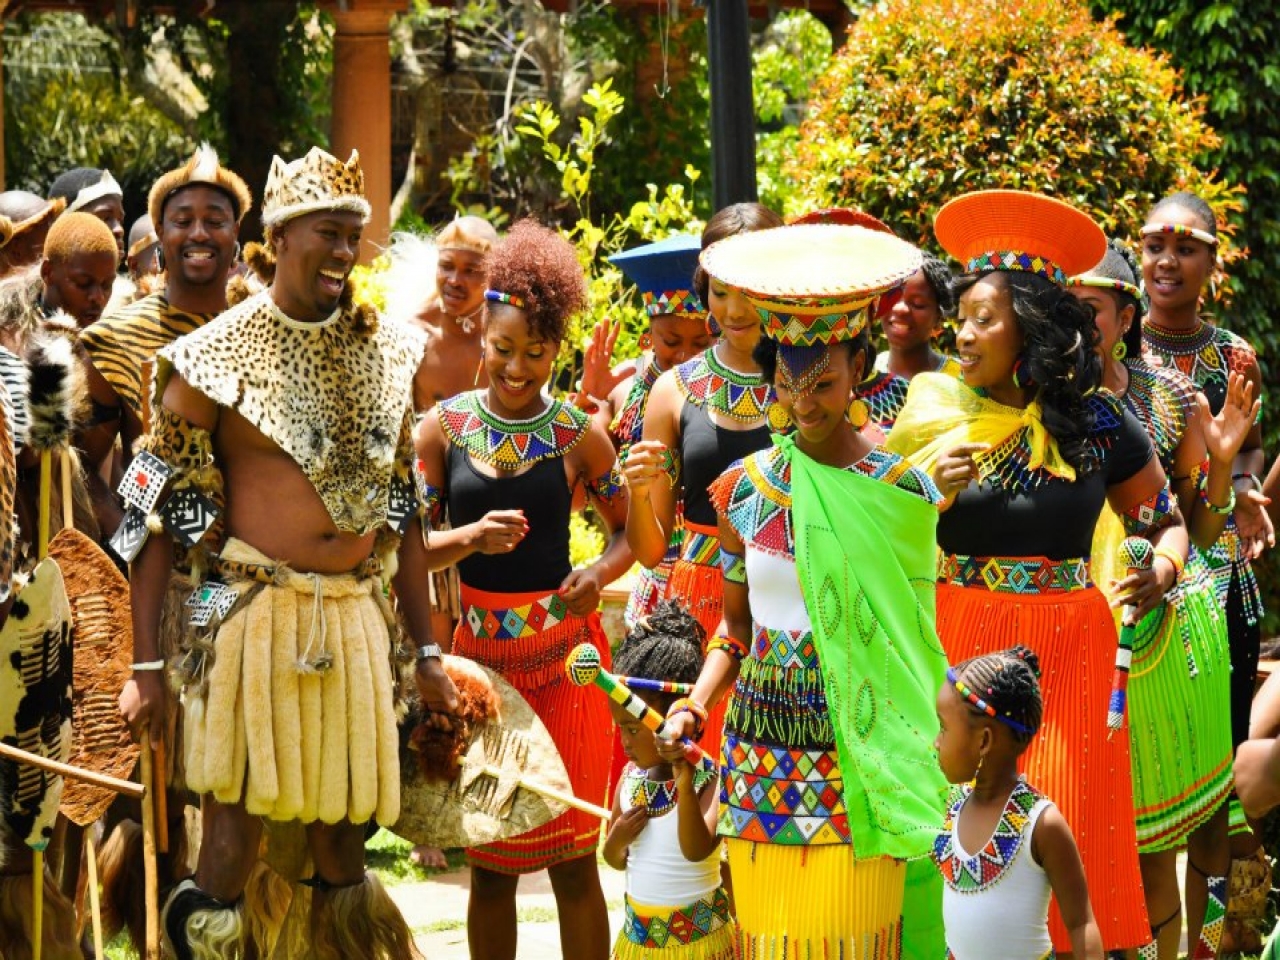 File photo of a reflection of the African art, music, and culture. The purpose of the Houston AfriFEST is to share cultural arts activities from the different nationalities and ethnic groups of the African continent.